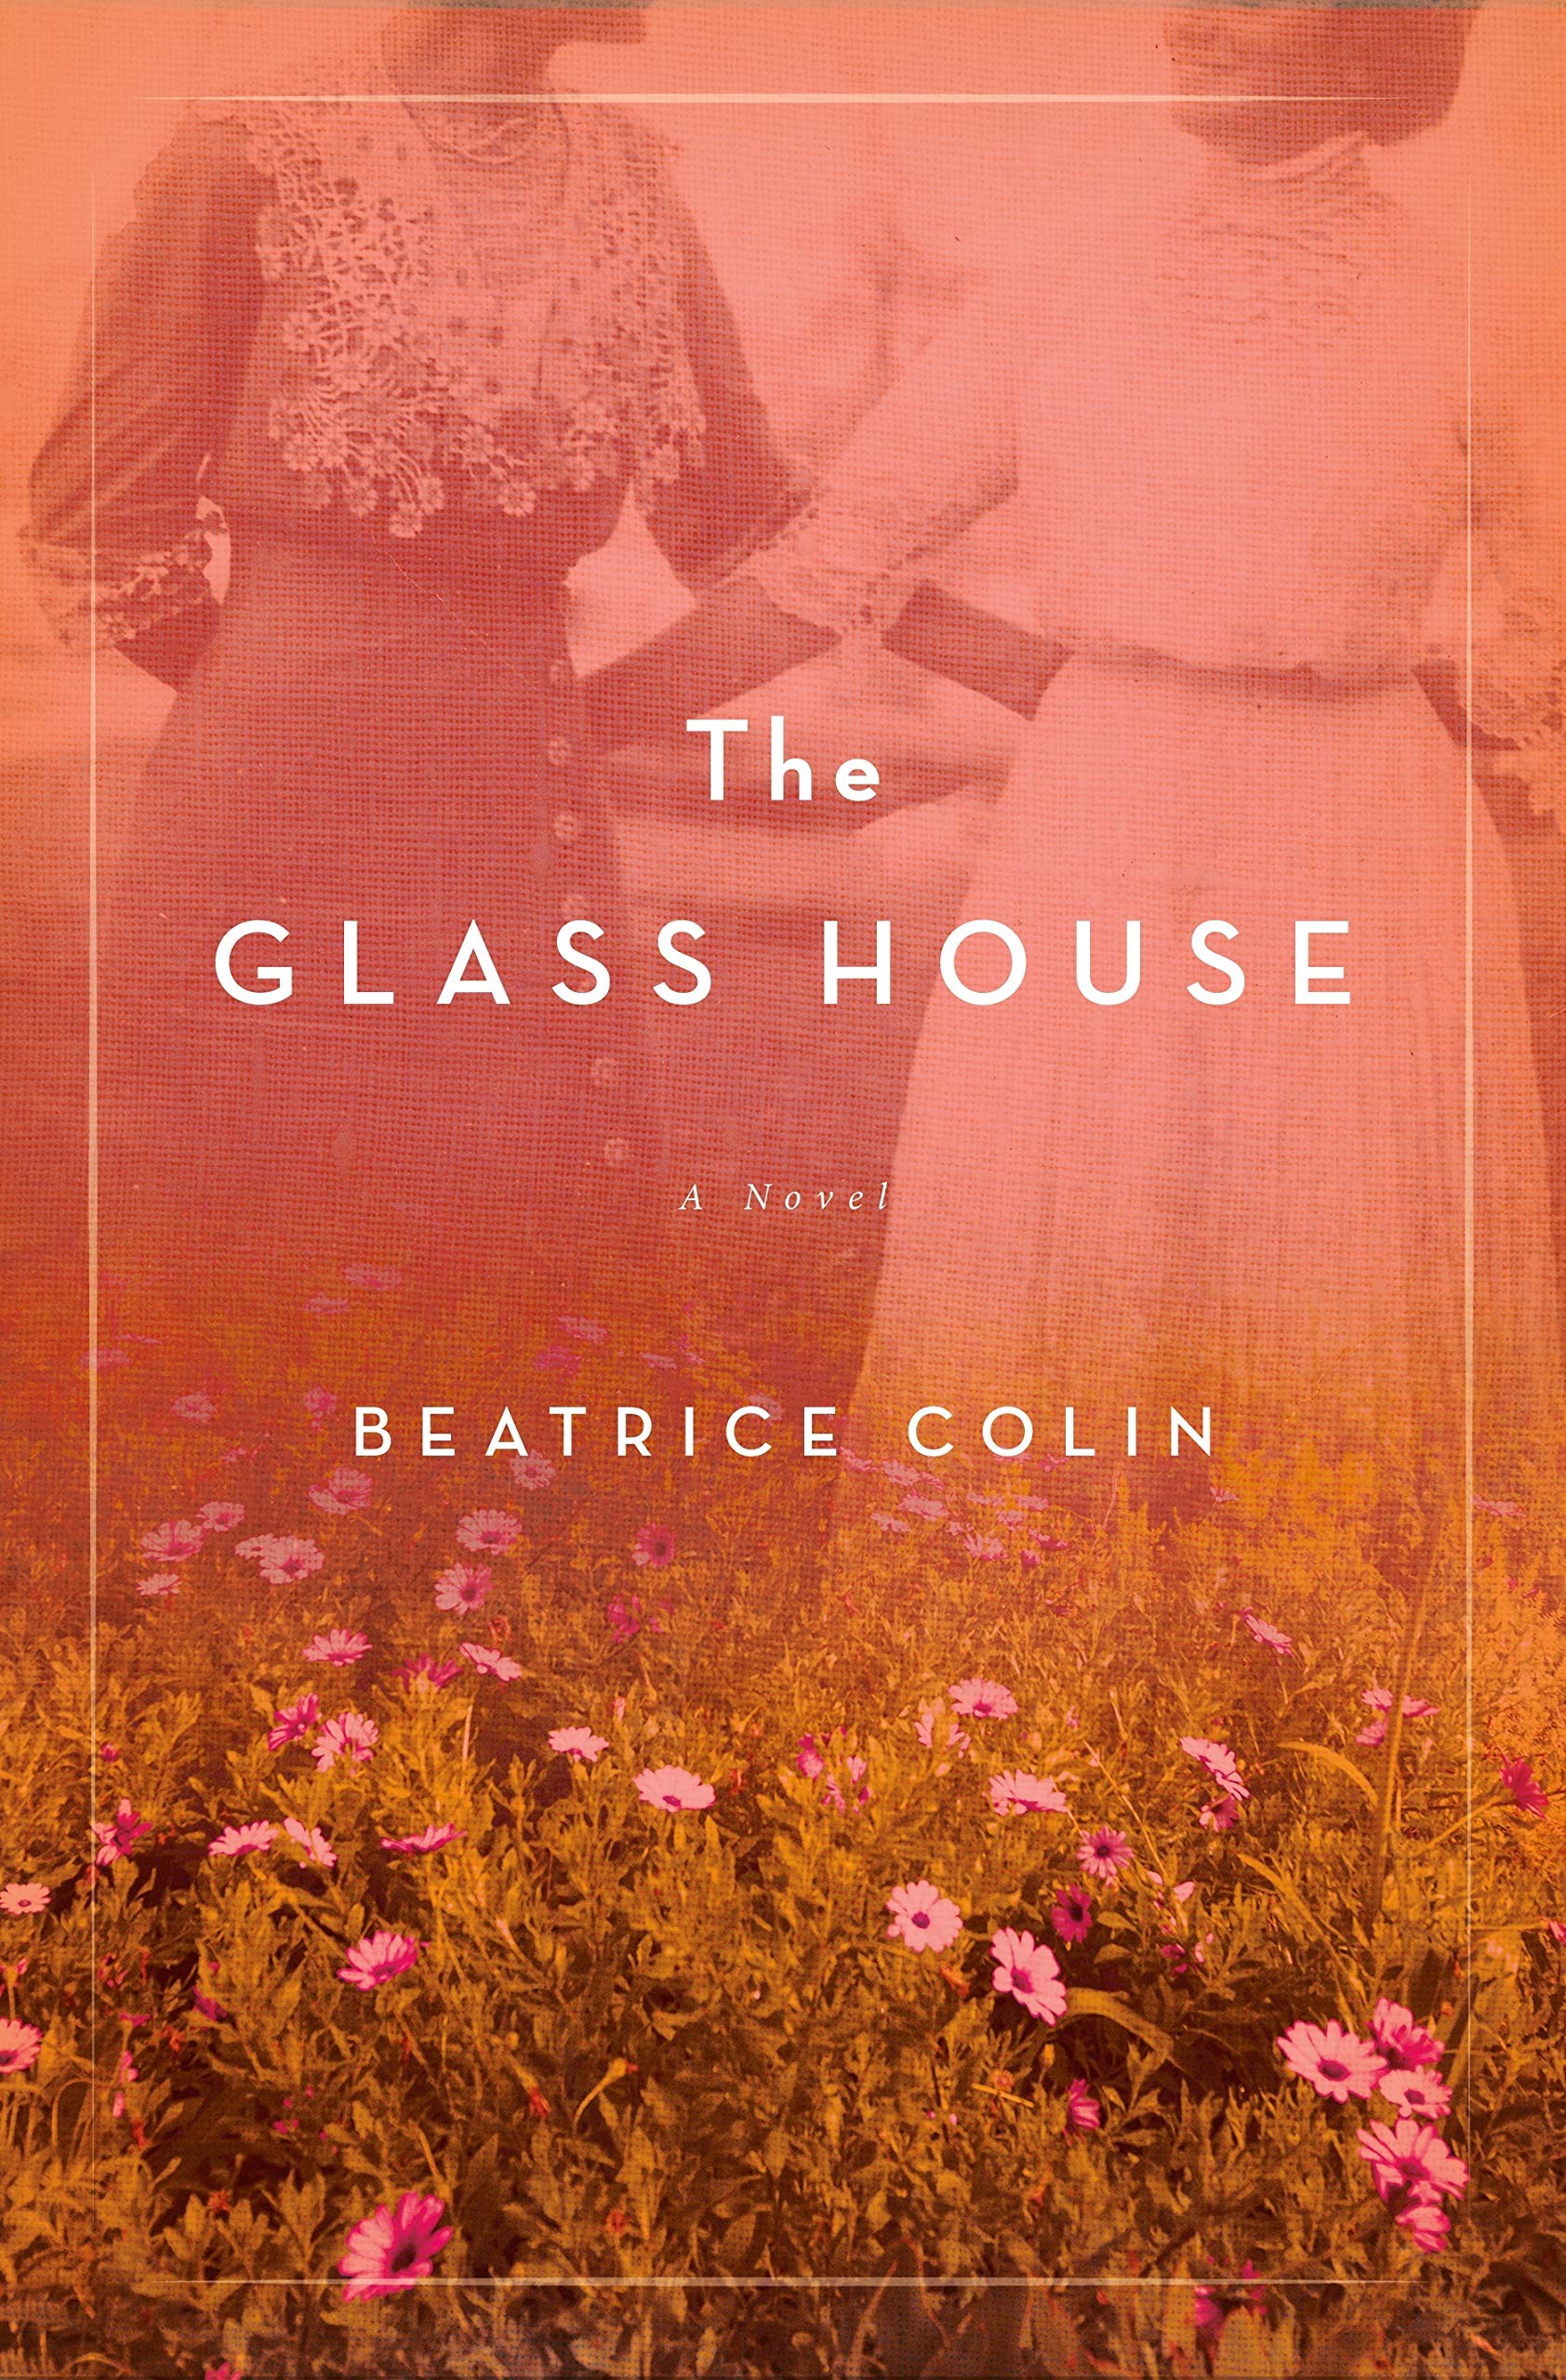 The Glass House A Novel Seattle Book Review